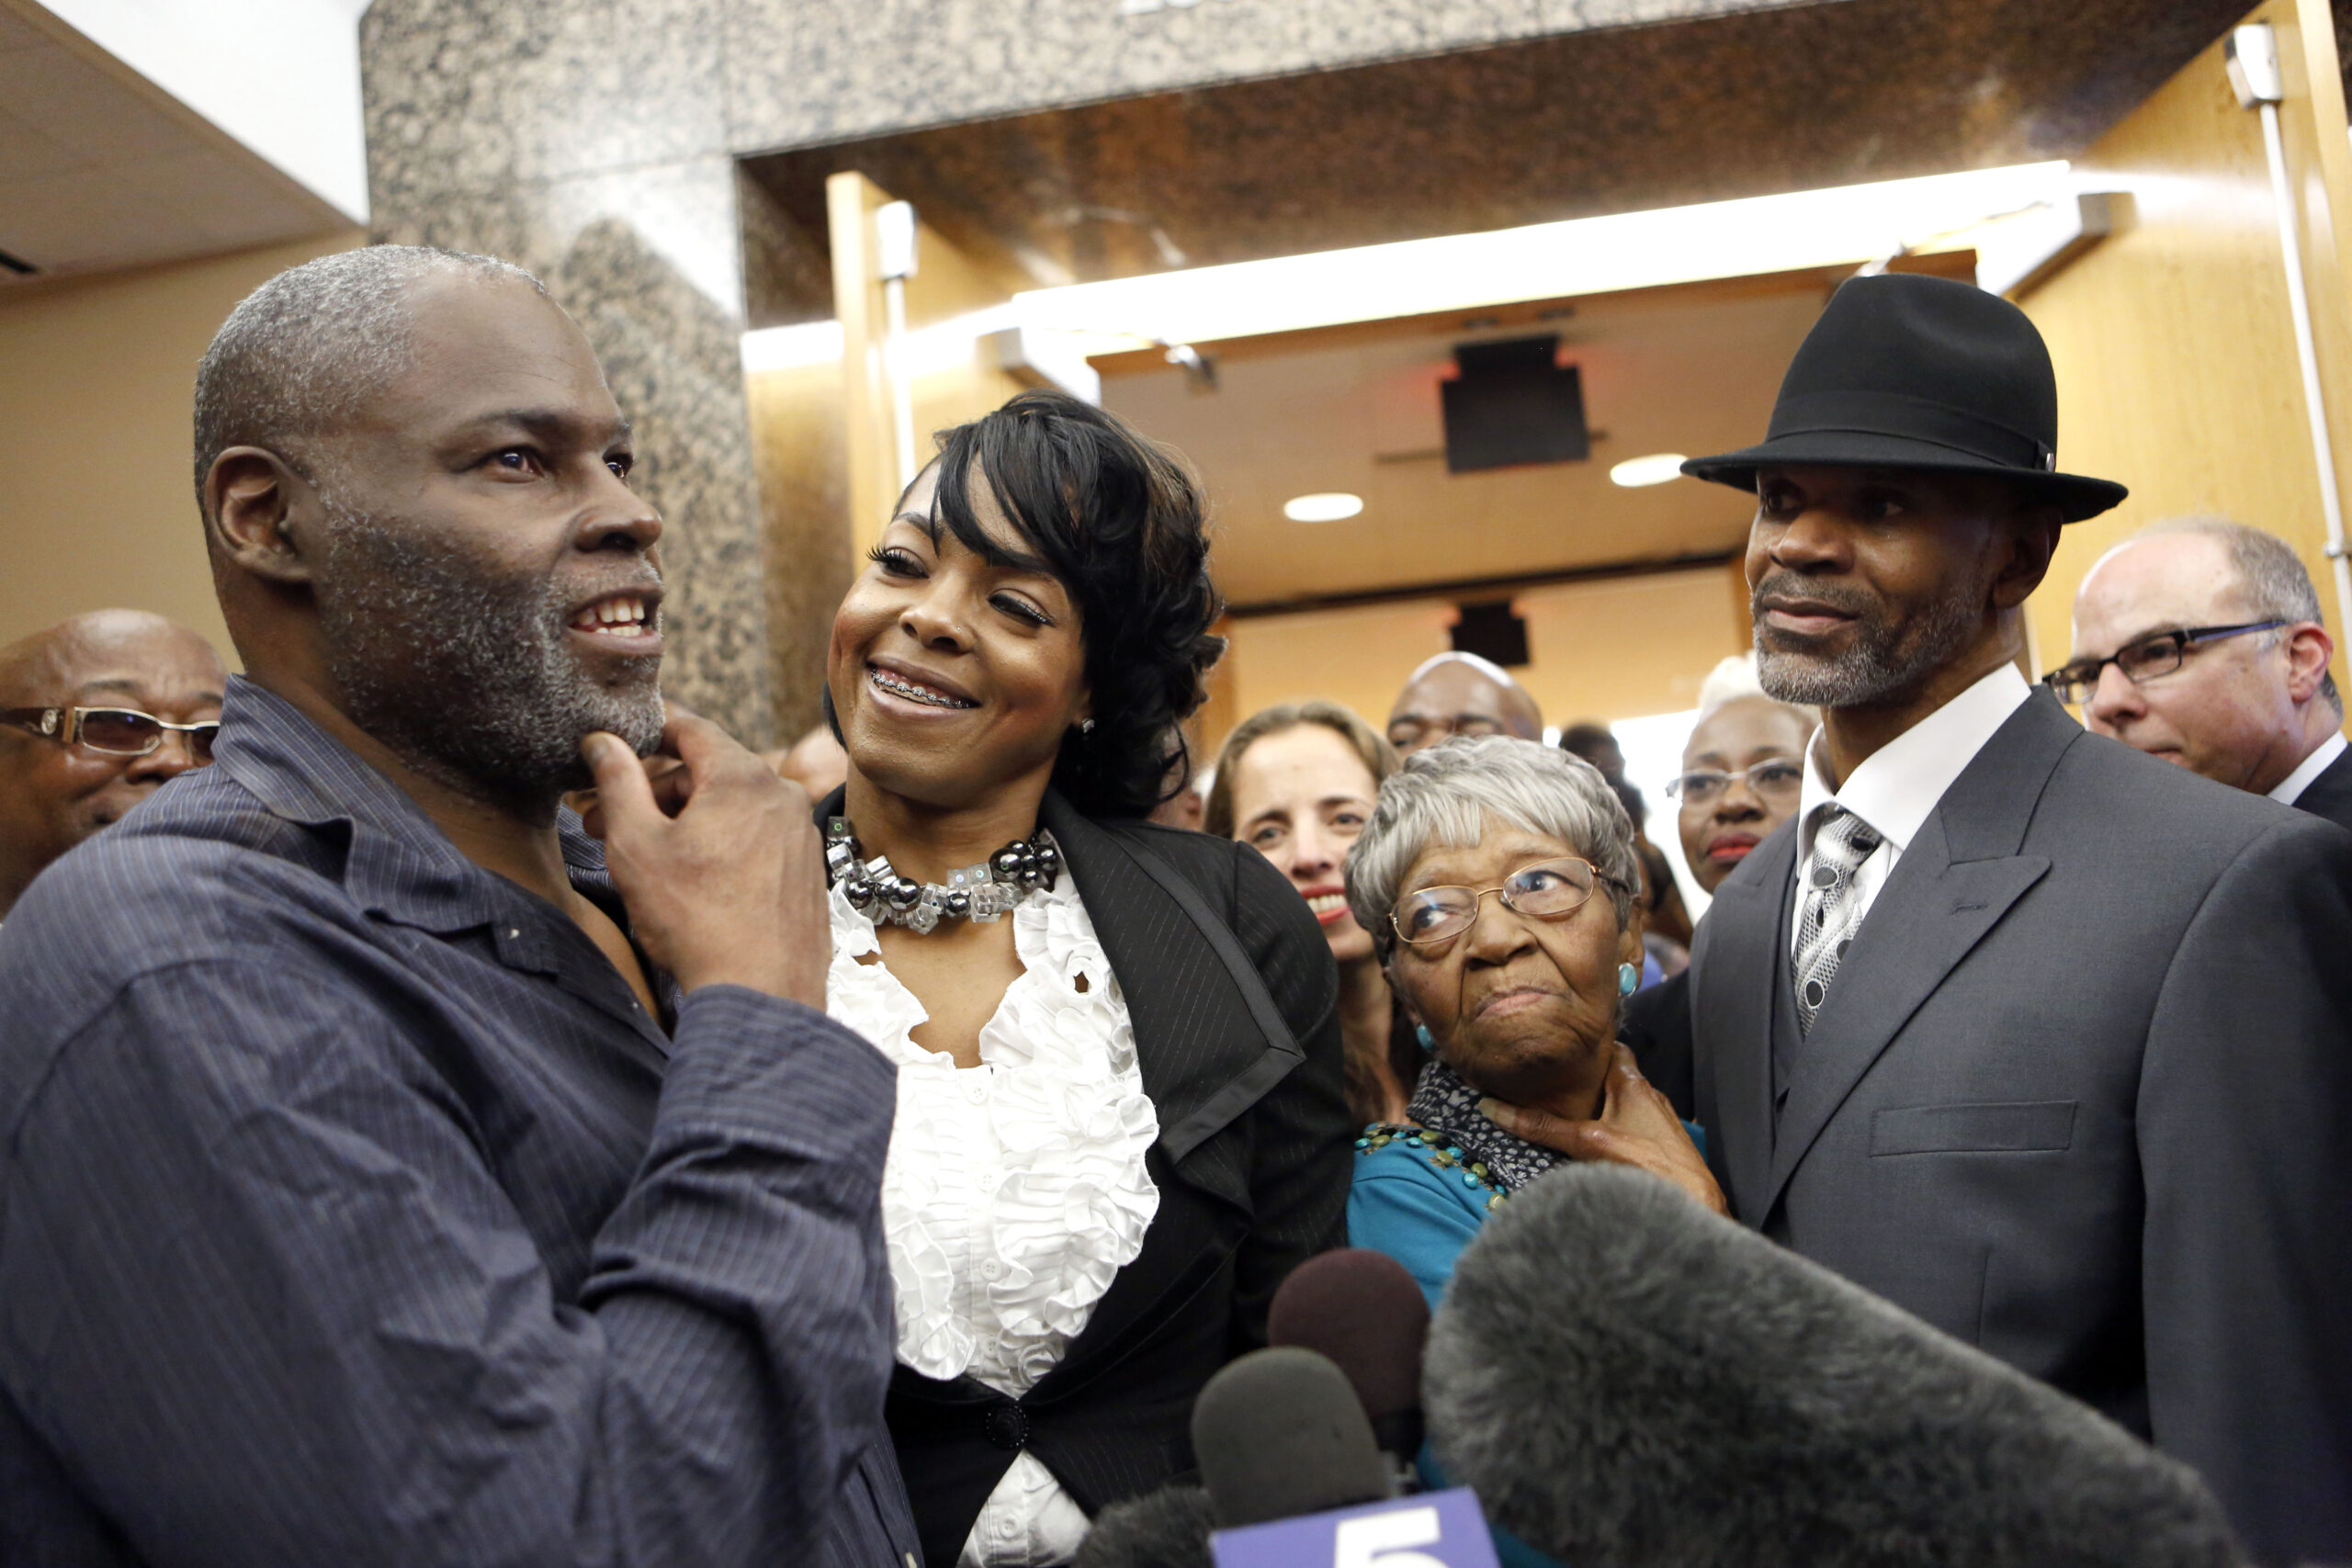 Stanley Orson Mozee, (left) represented by the InnocenceProject, with his daughter, LaTonya Mozee, (second from left) and Dennis Lee Allen, (right) represented by the Innocence Project of Texas, with his grandmother, Opealean Smith, (second from right), celebrate their freedom after Judge Mark Stoltz overturned their convictions on Tuesday, Oct. 28, 2014. (Image: Lara Solt)